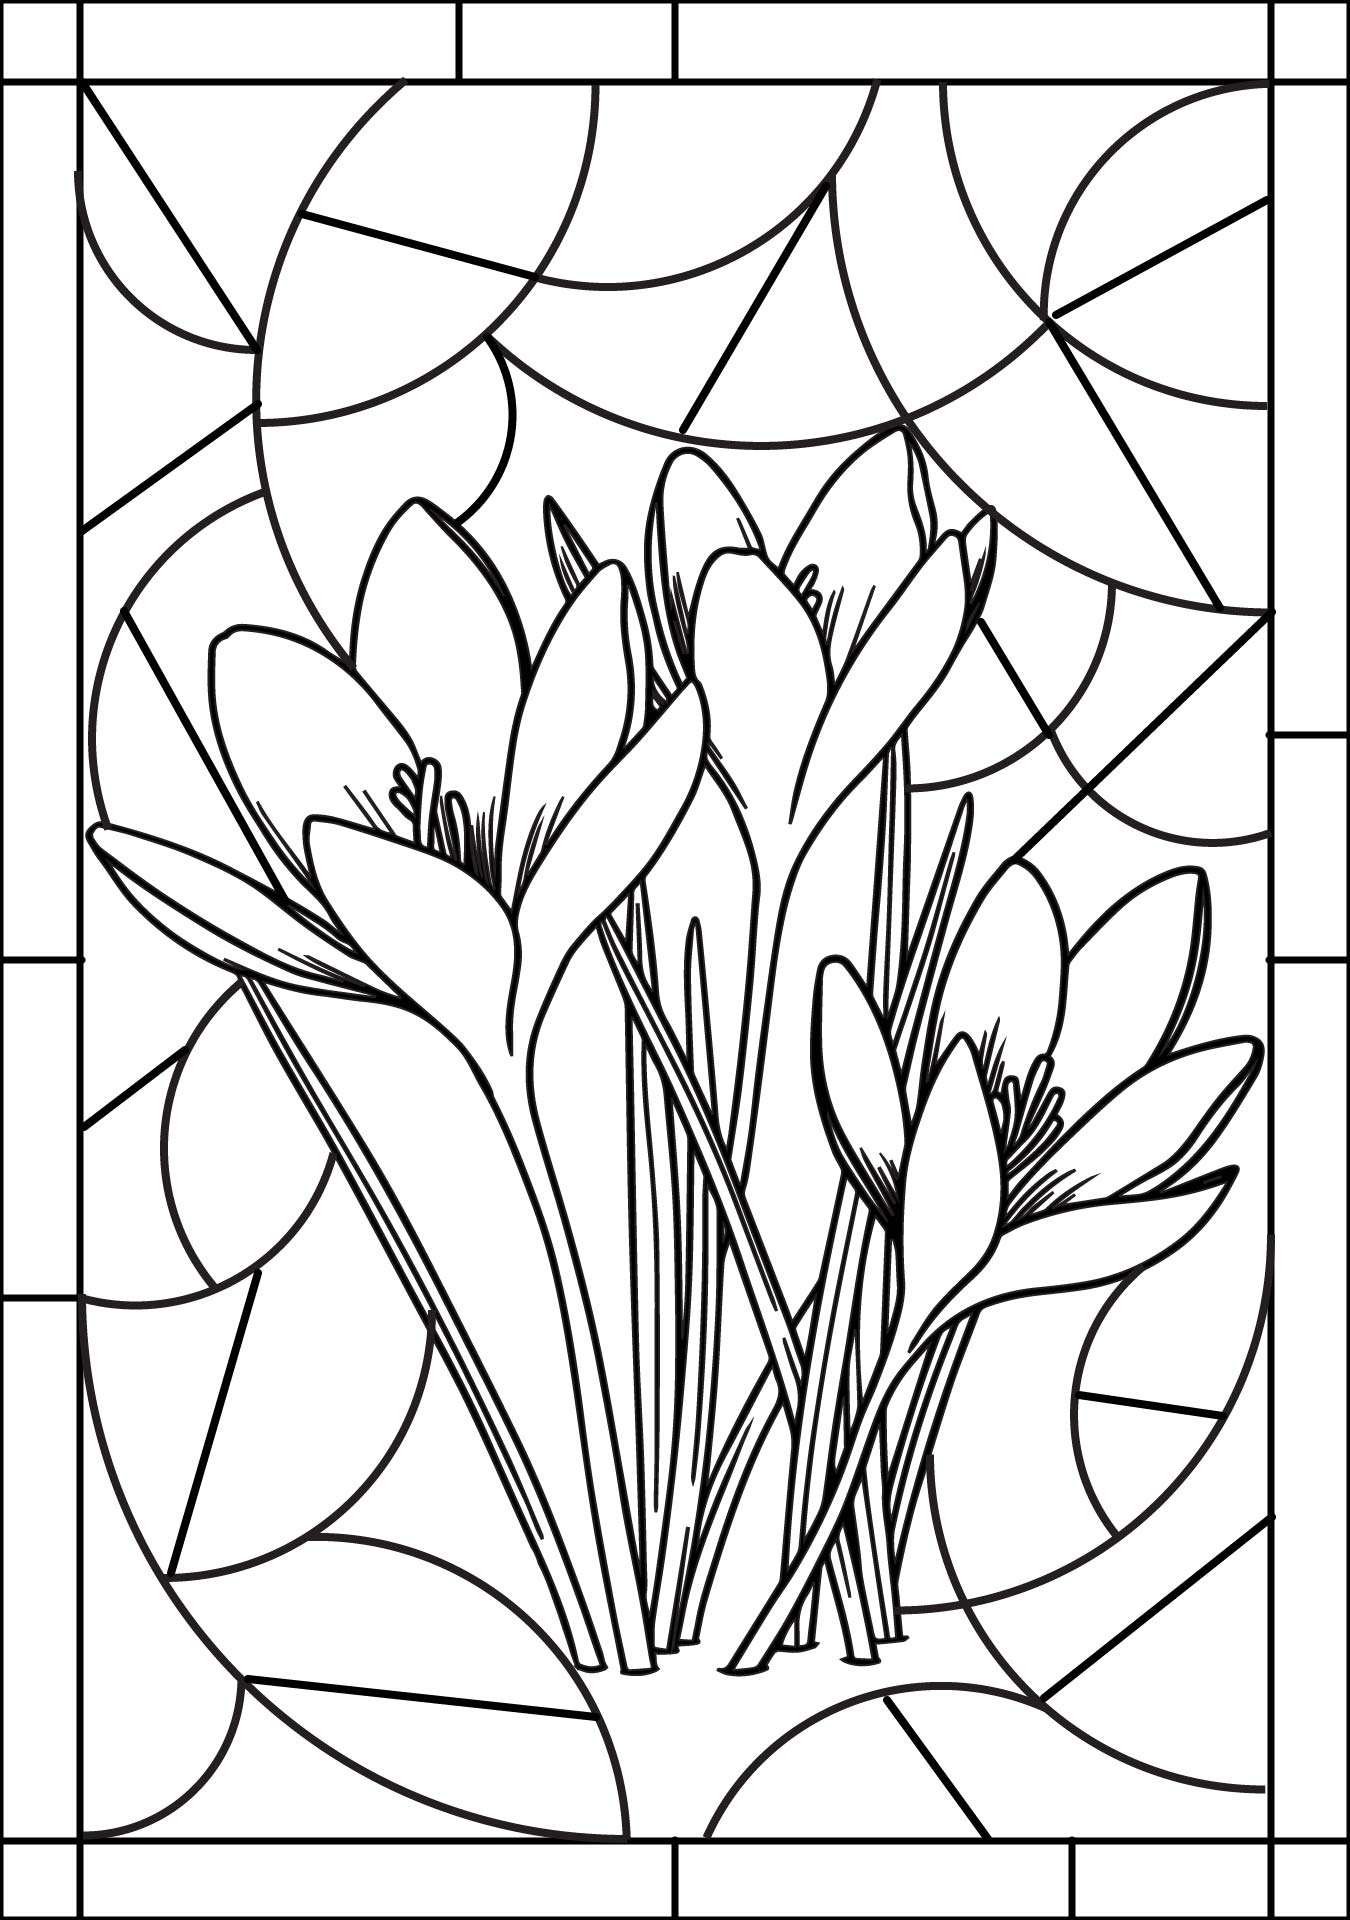 Stained Glass Patterns Coloring Book Printable